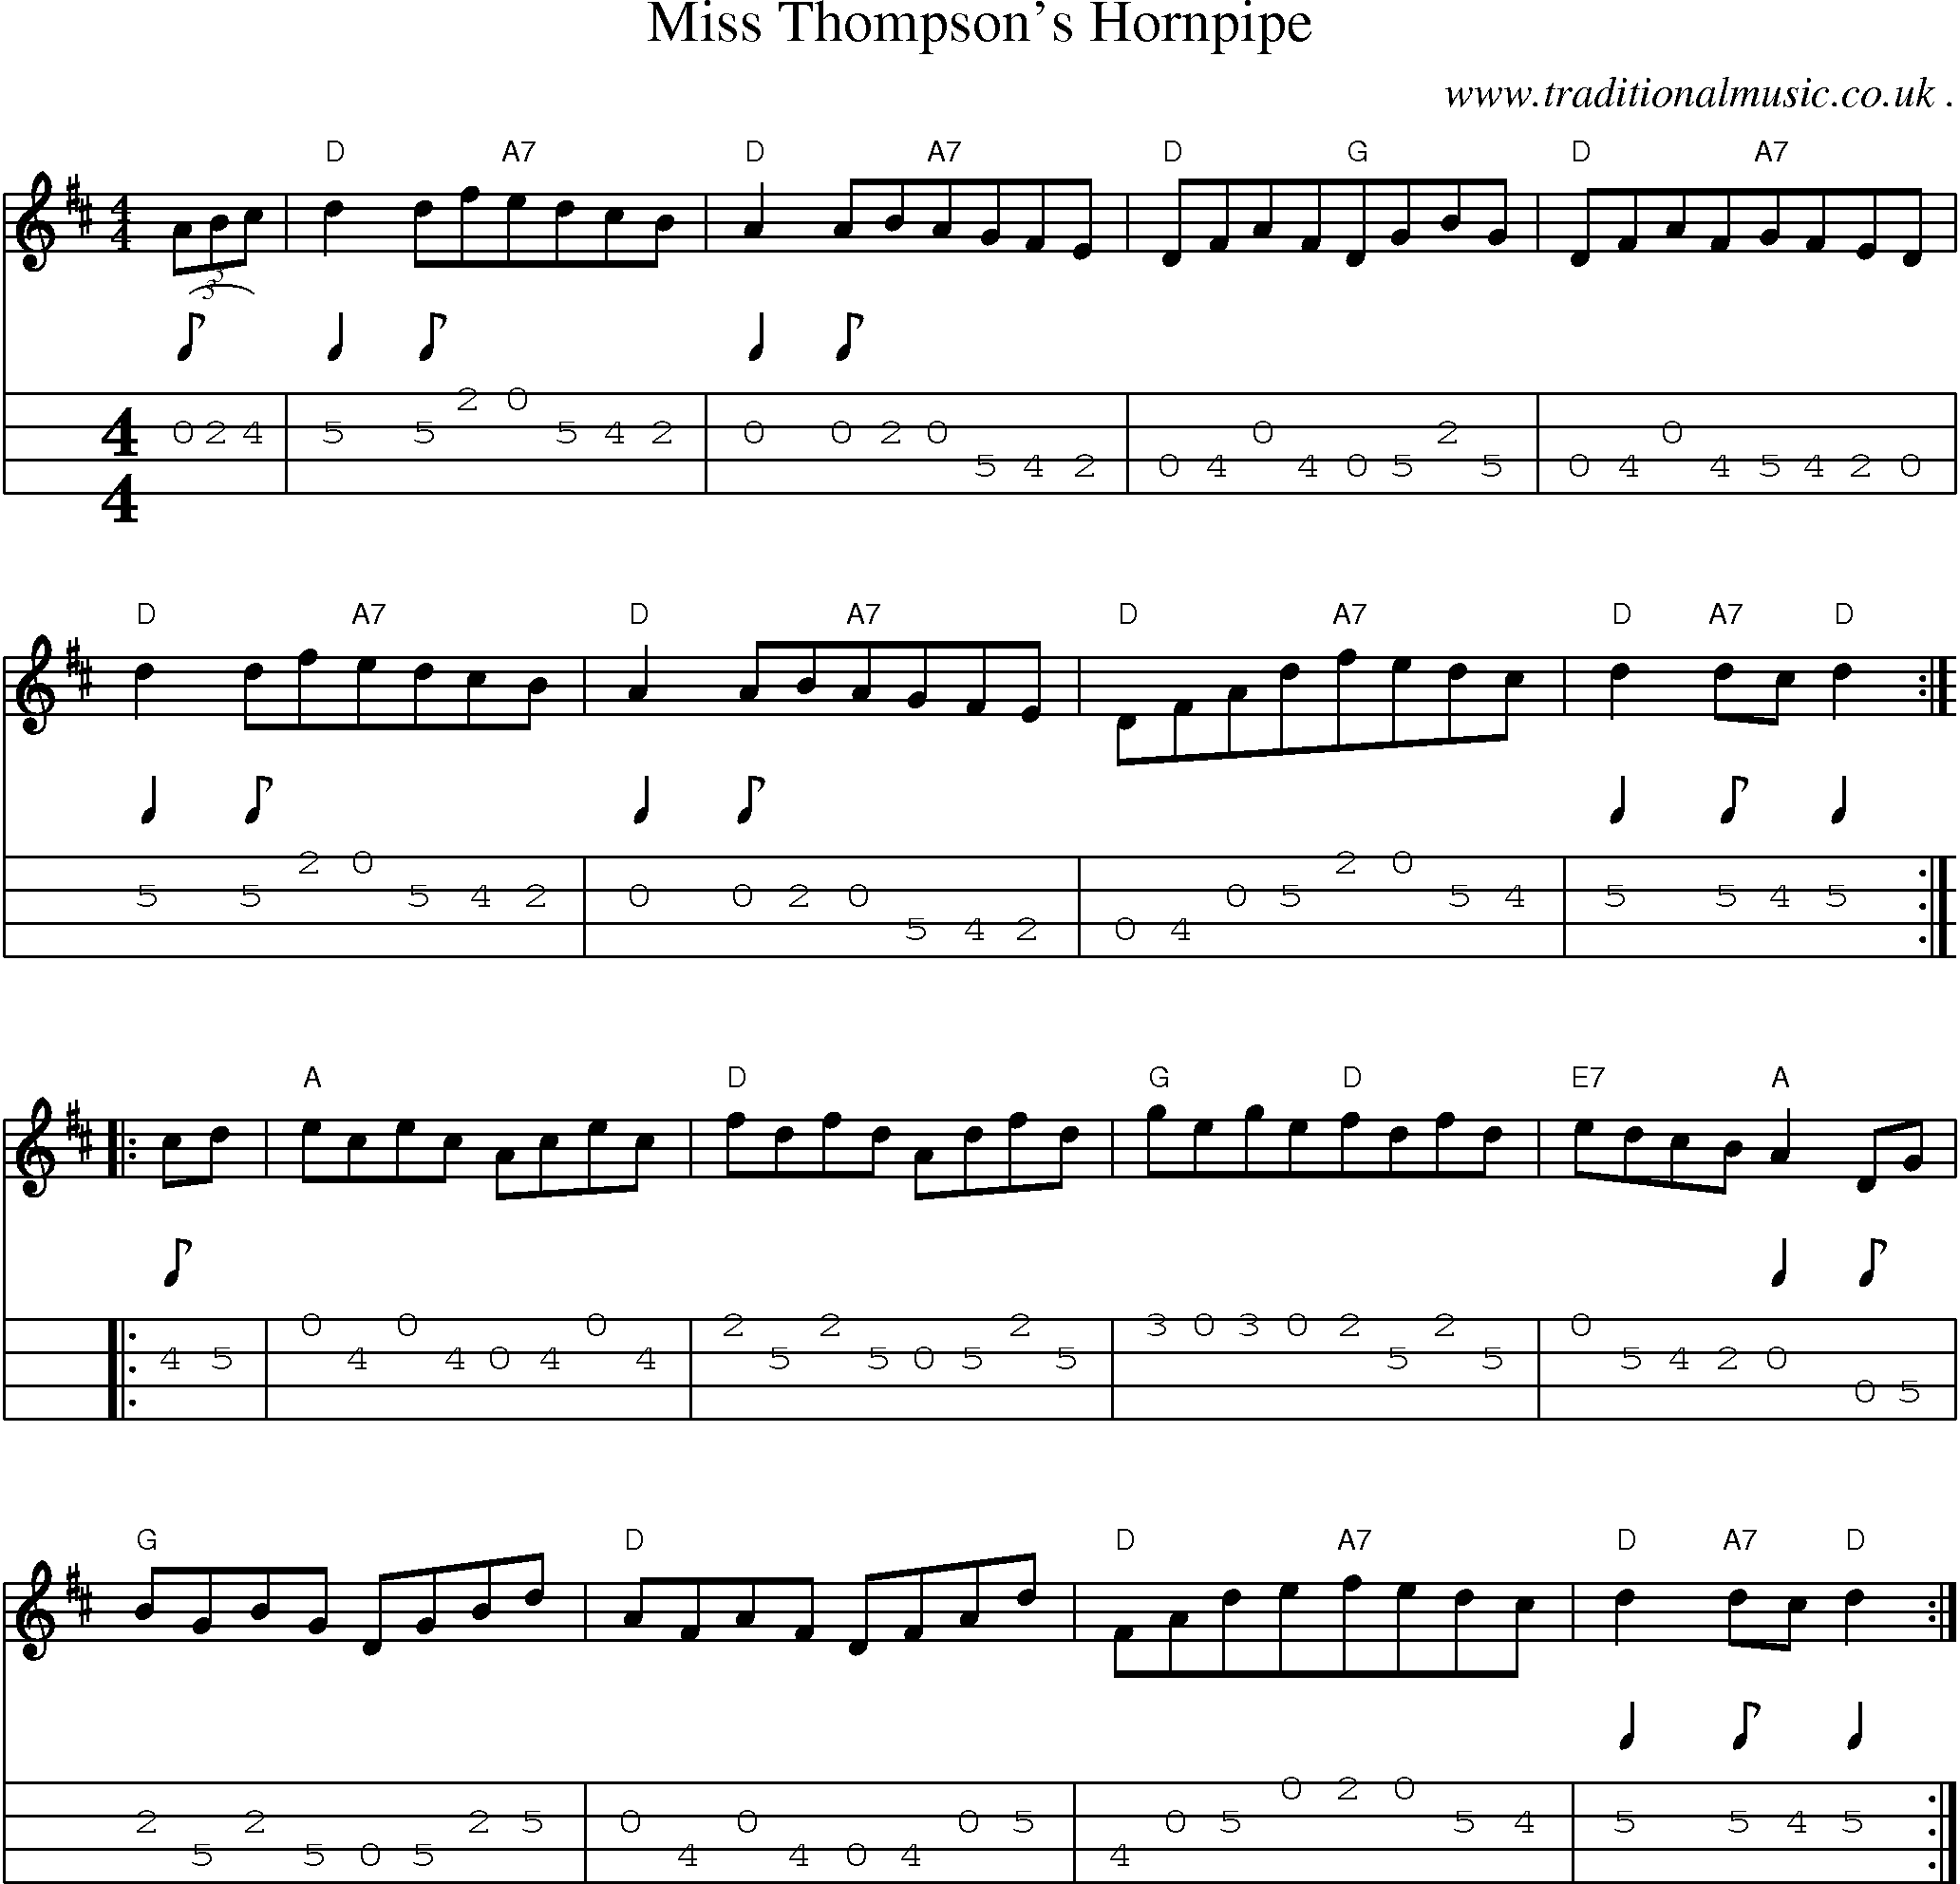 Sheet-Music and Mandolin Tabs for Miss Thompsons Hornpipe